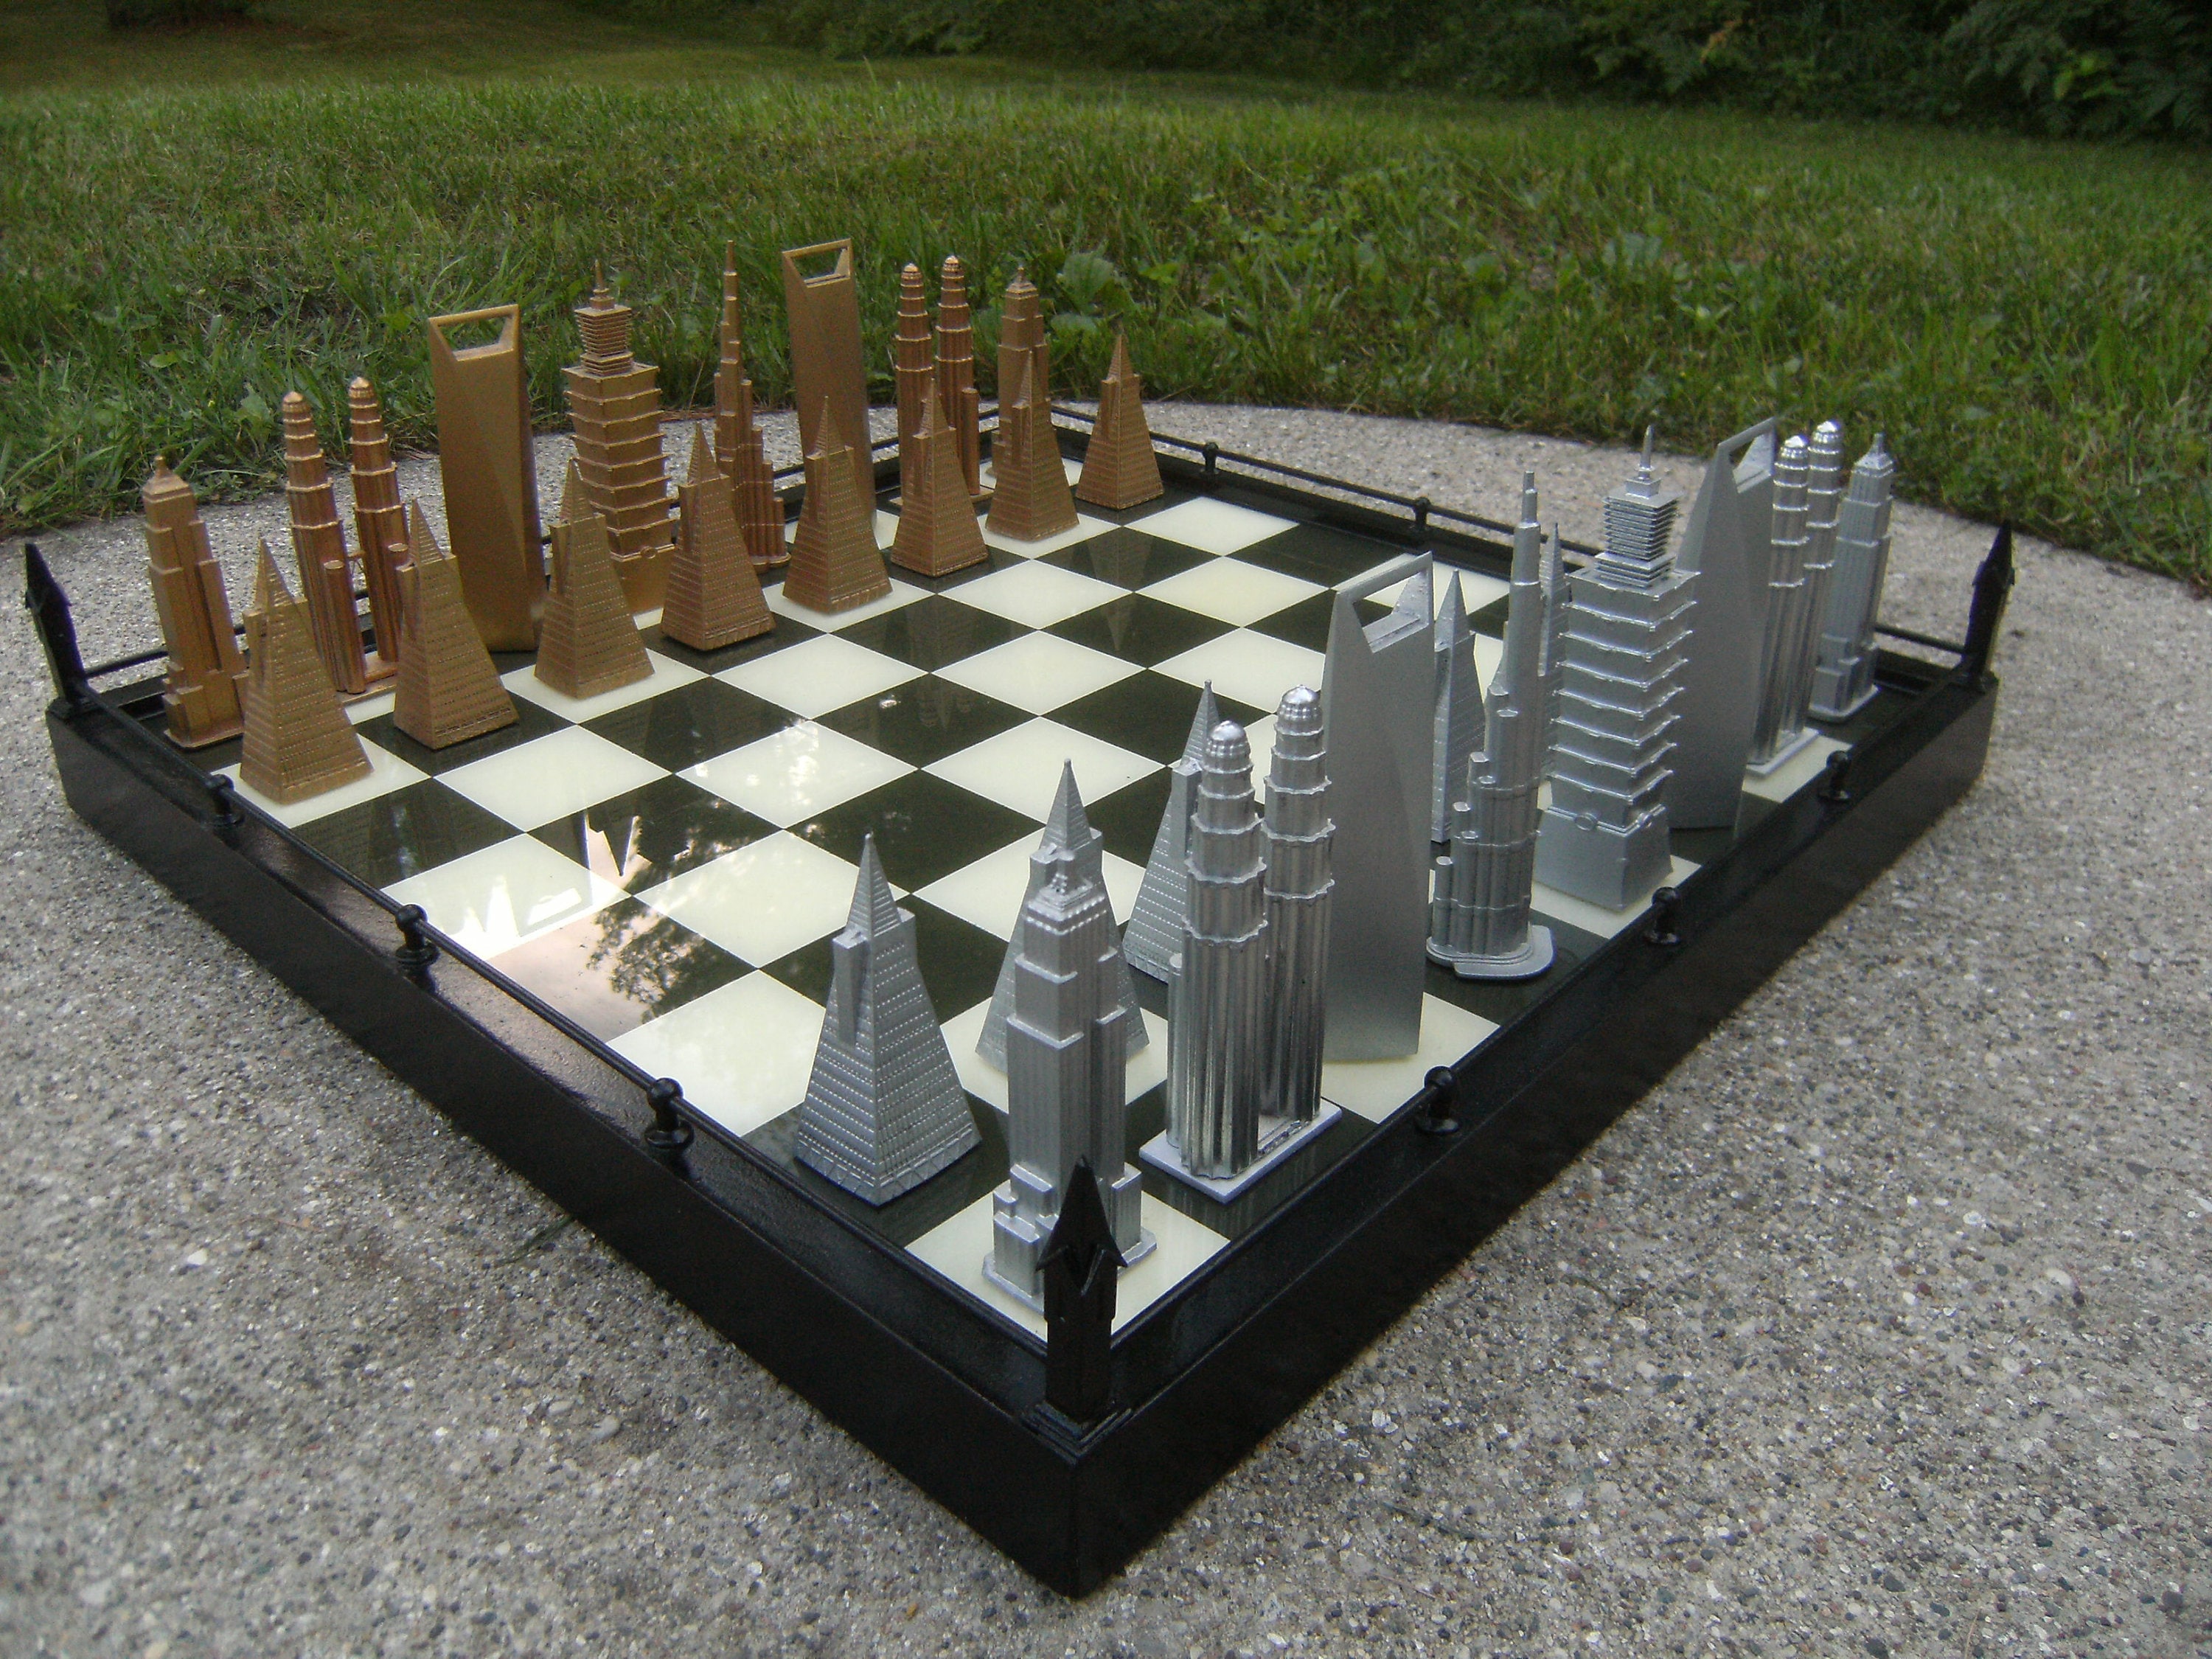 House of Hauteville Chess Set and Board Combo - Antique White and